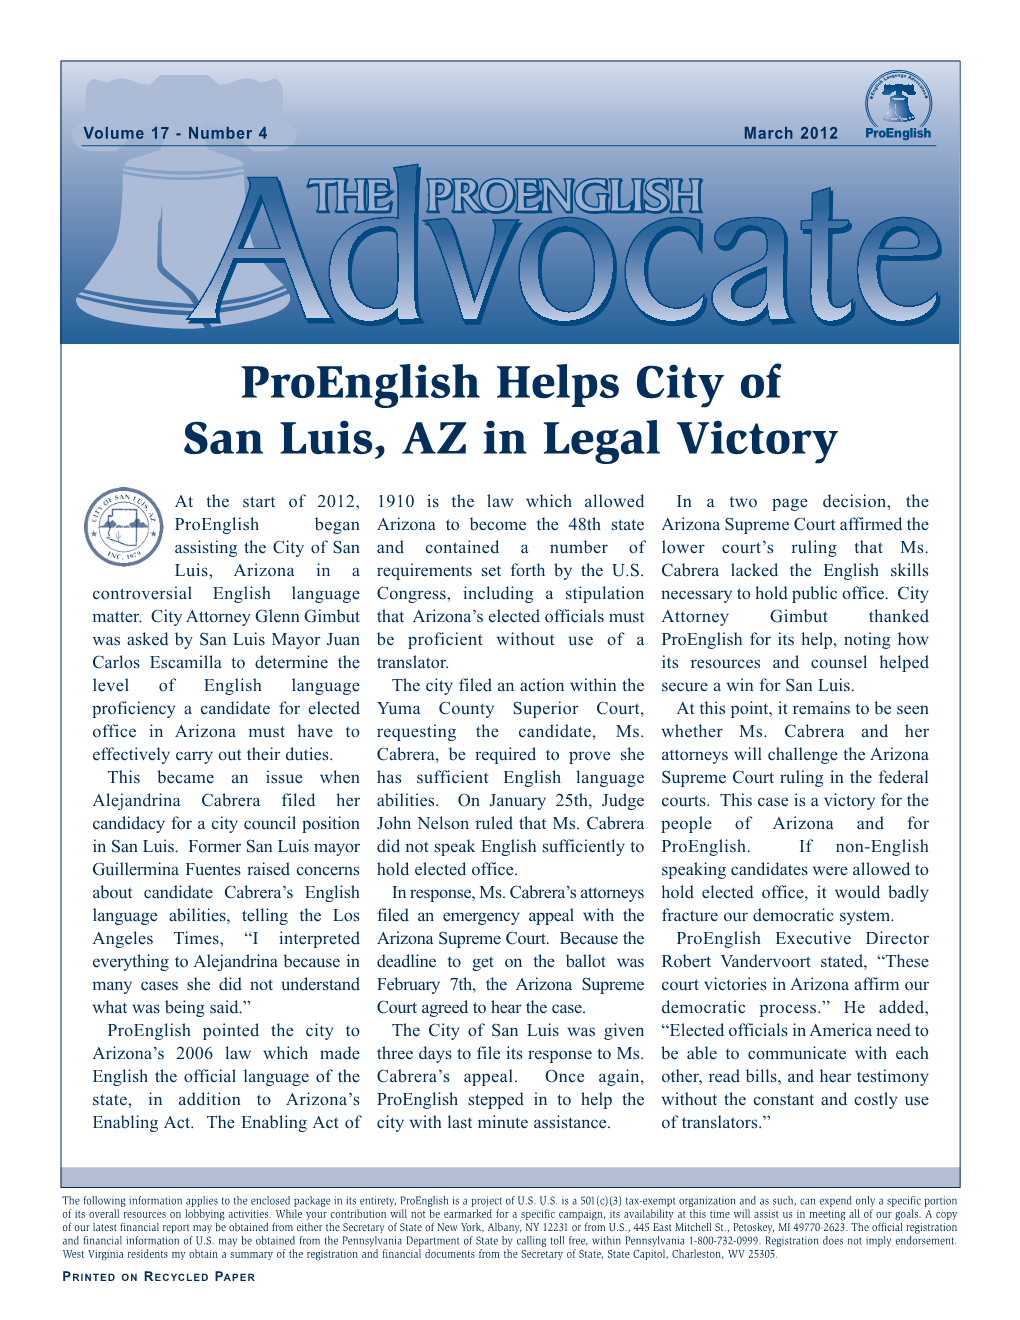 Proenglish Helps City of San Luis, AZ in Legal Victory